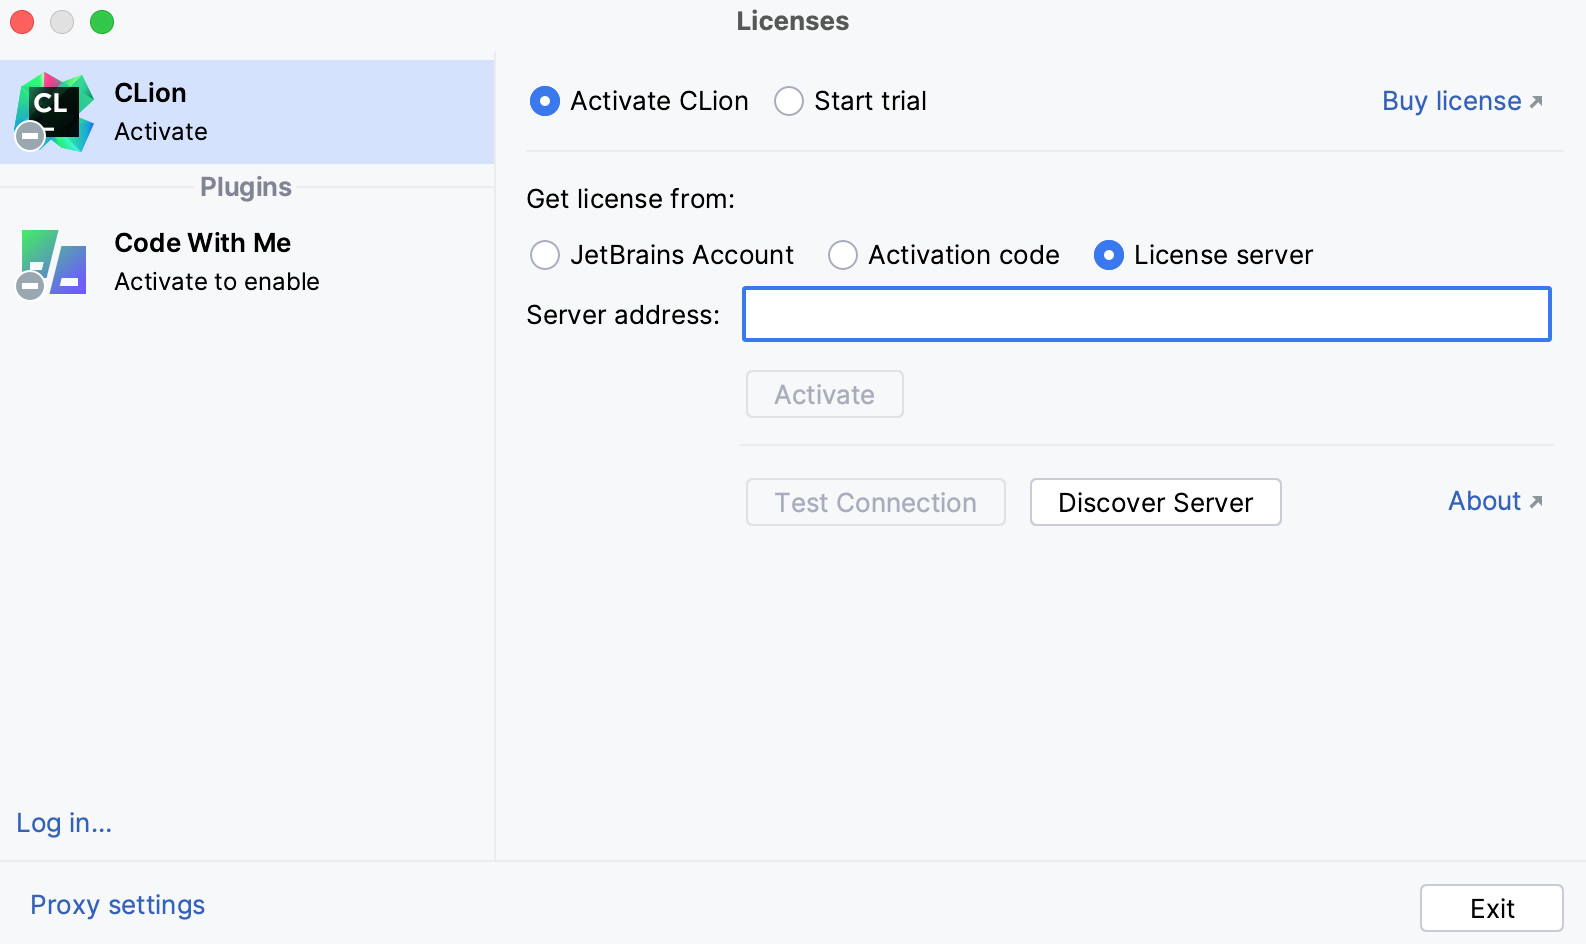 Activate CLion license with a license server